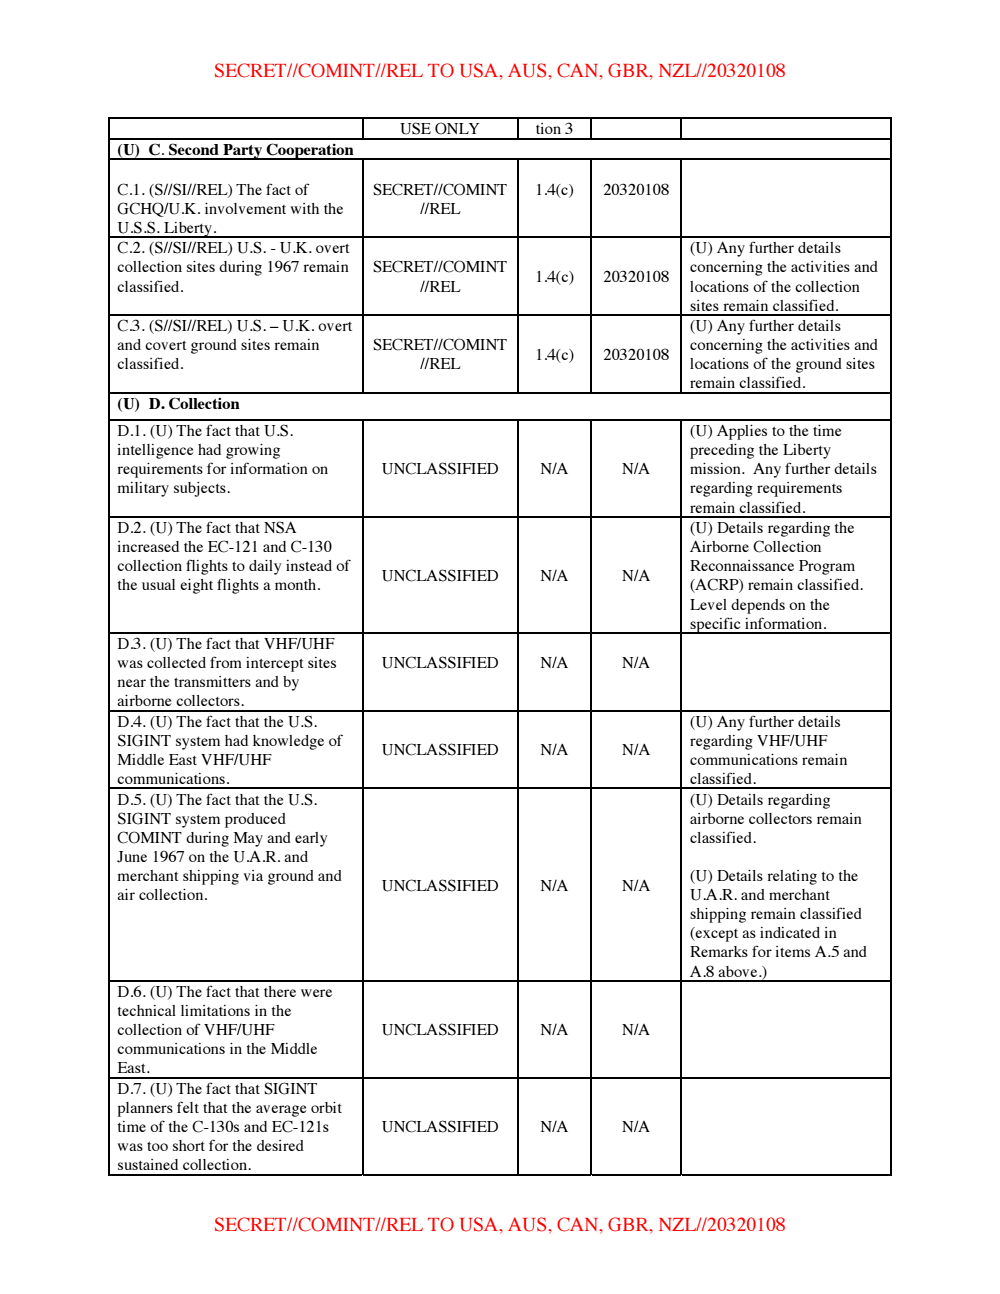 Page 8 from NSA’s USS Liberty Incident Classification Guide